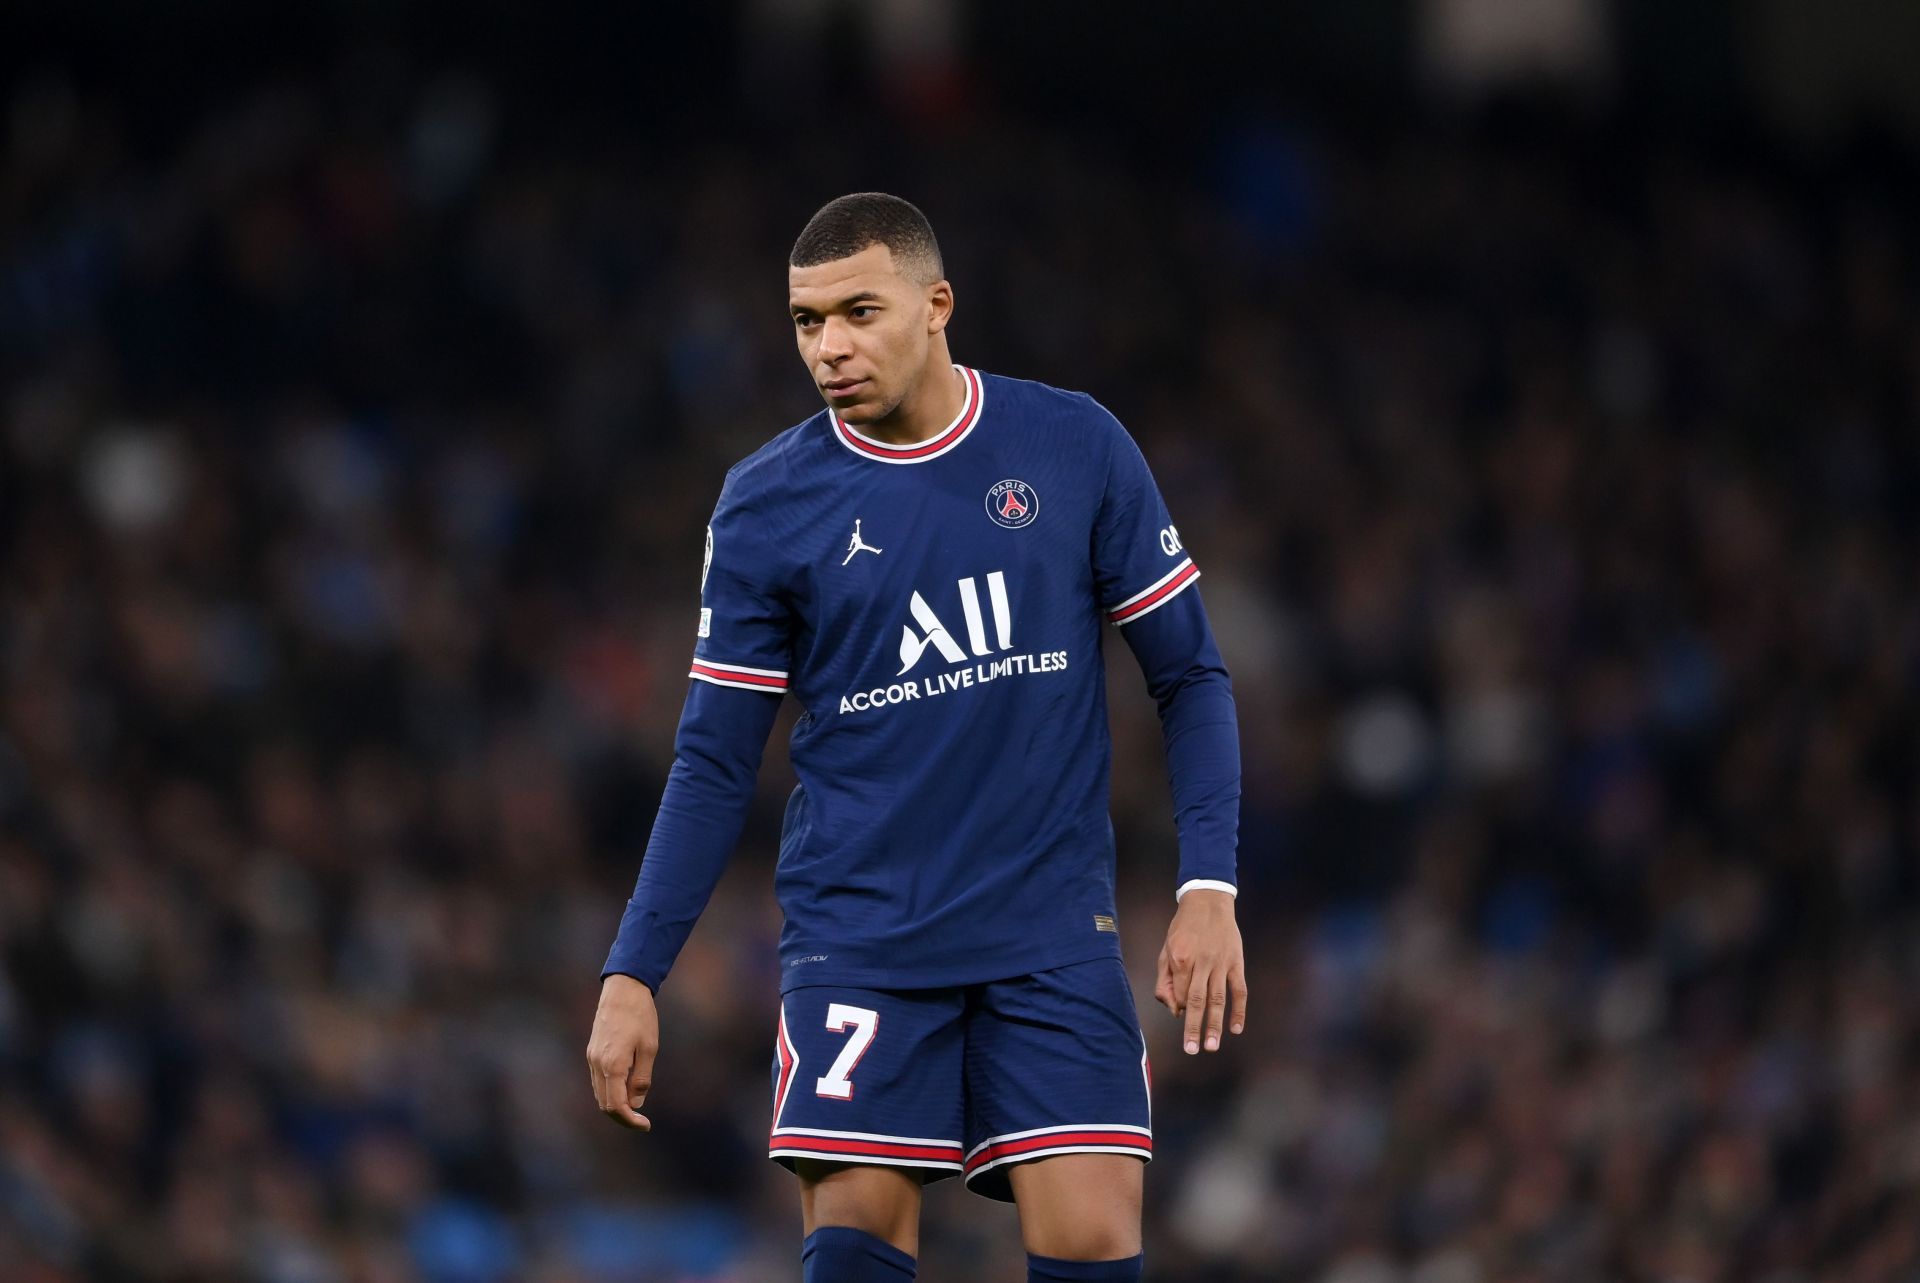 Karim Benzema has tipped Kylian Mbappe (in pic) to join Real Madrid.